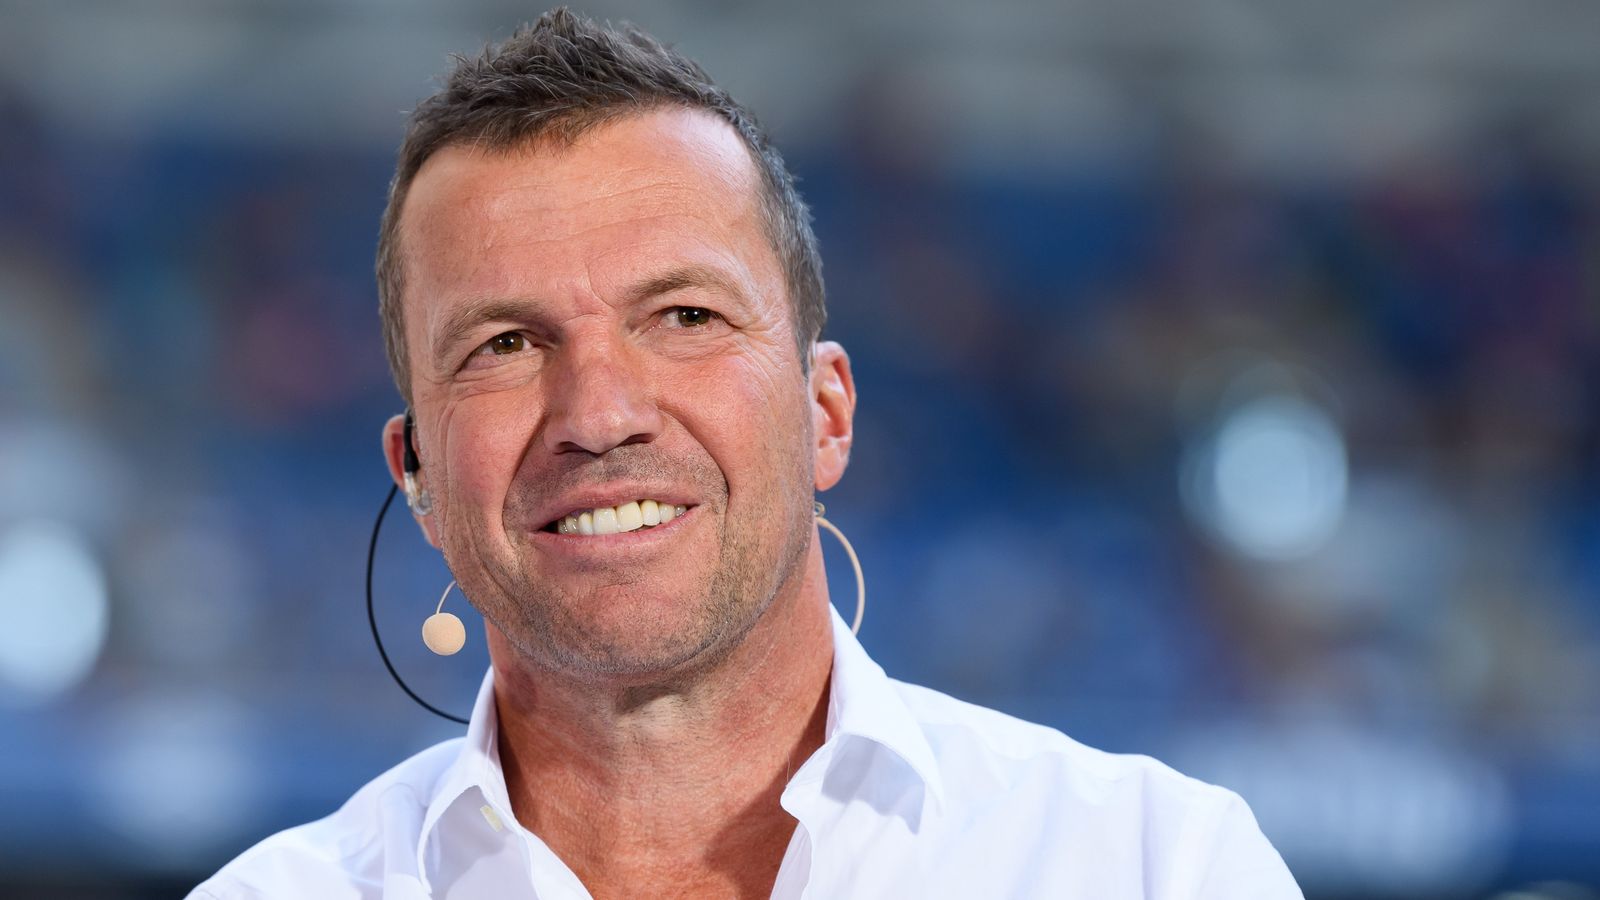 Germany legend Lothar Matthaus respects England but says players alone are not enough to win Euro 2020